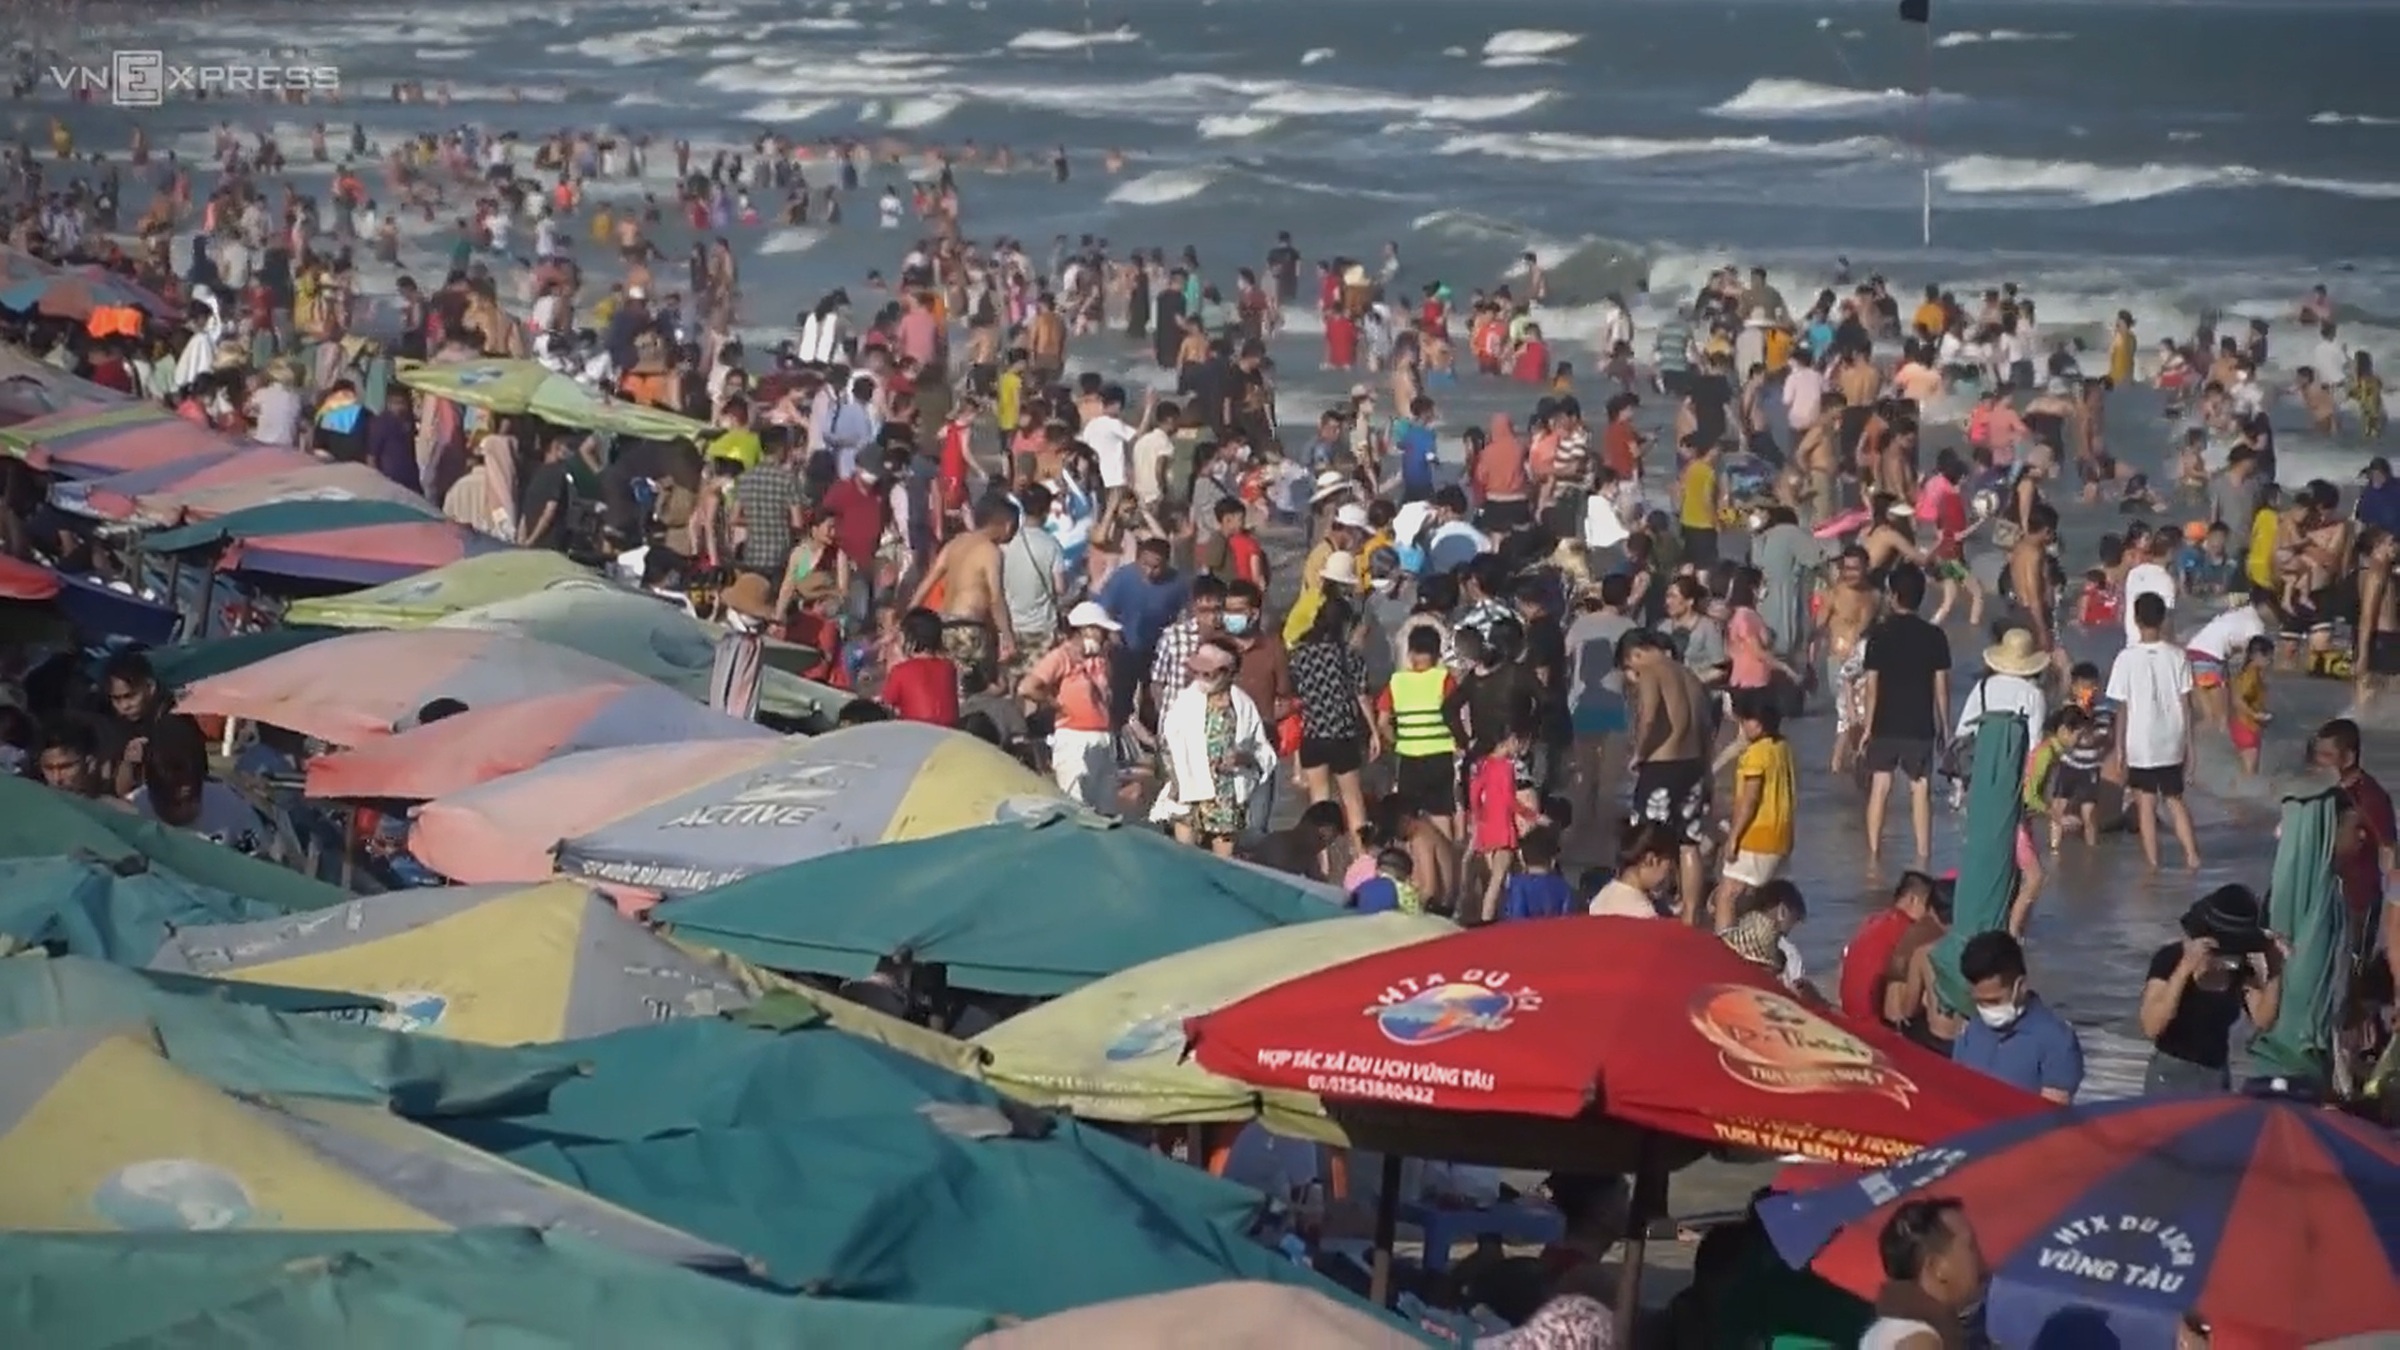 Crowds fill up a beach in Vung Tau Town on February 3, 2022. Photo by VnExpress/Truong Ha